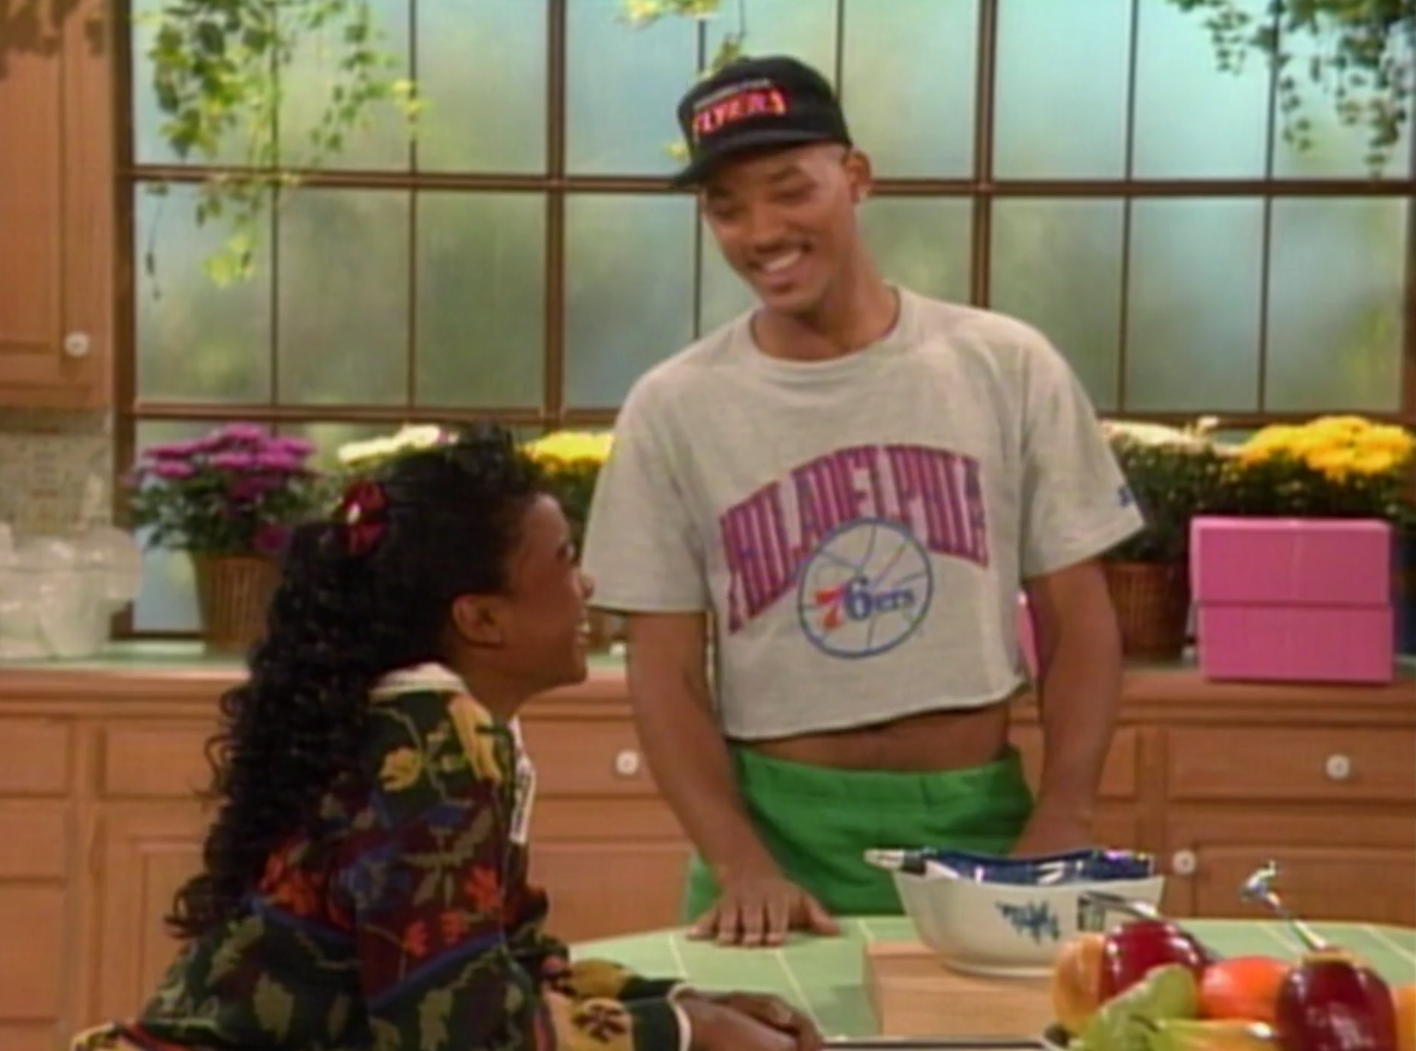 33 Outfits From Fresh Prince That Need To Make A Comeback